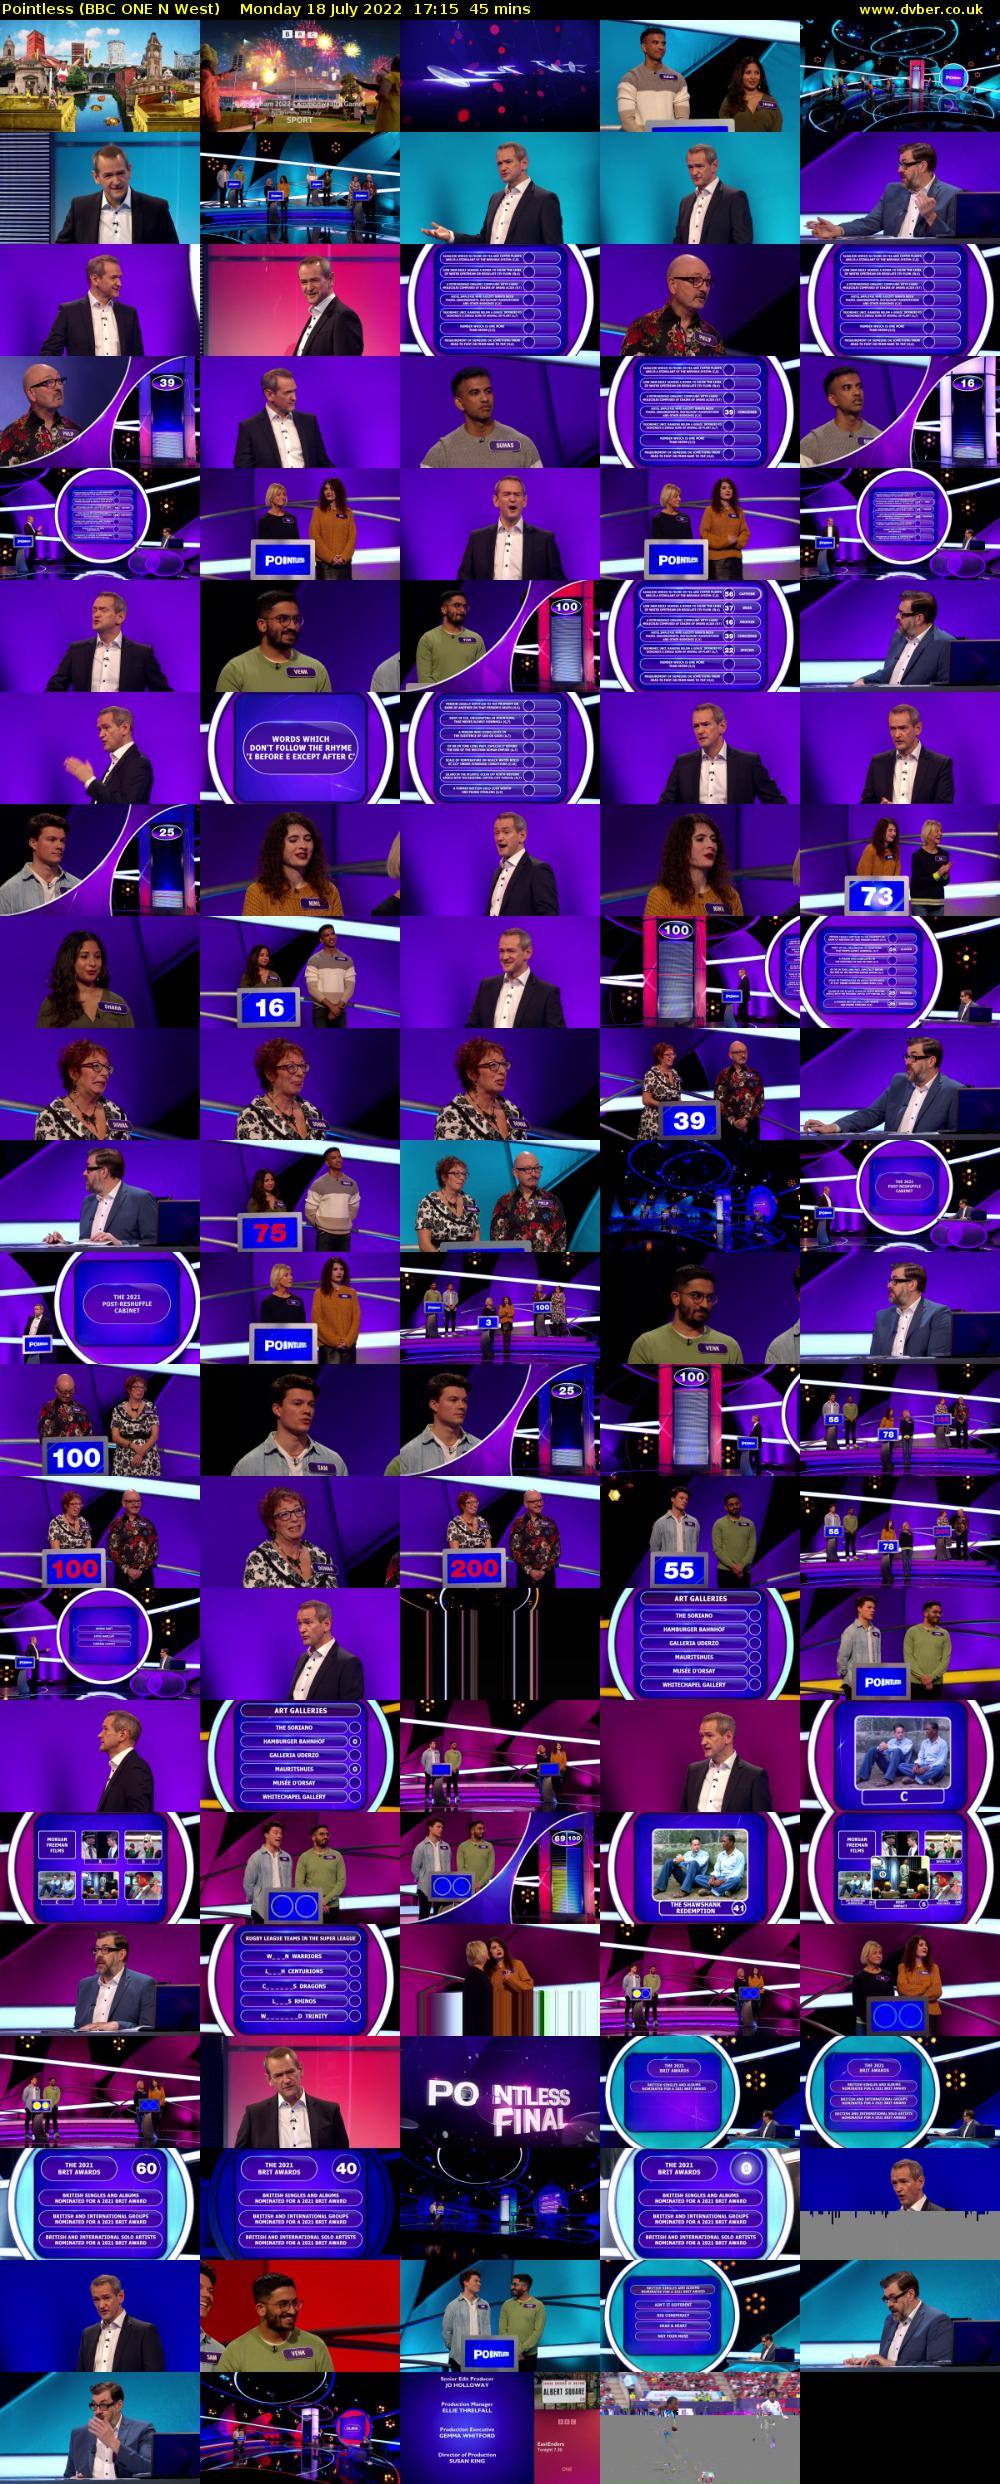 Pointless (BBC ONE N West) Monday 18 July 2022 17:15 - 18:00